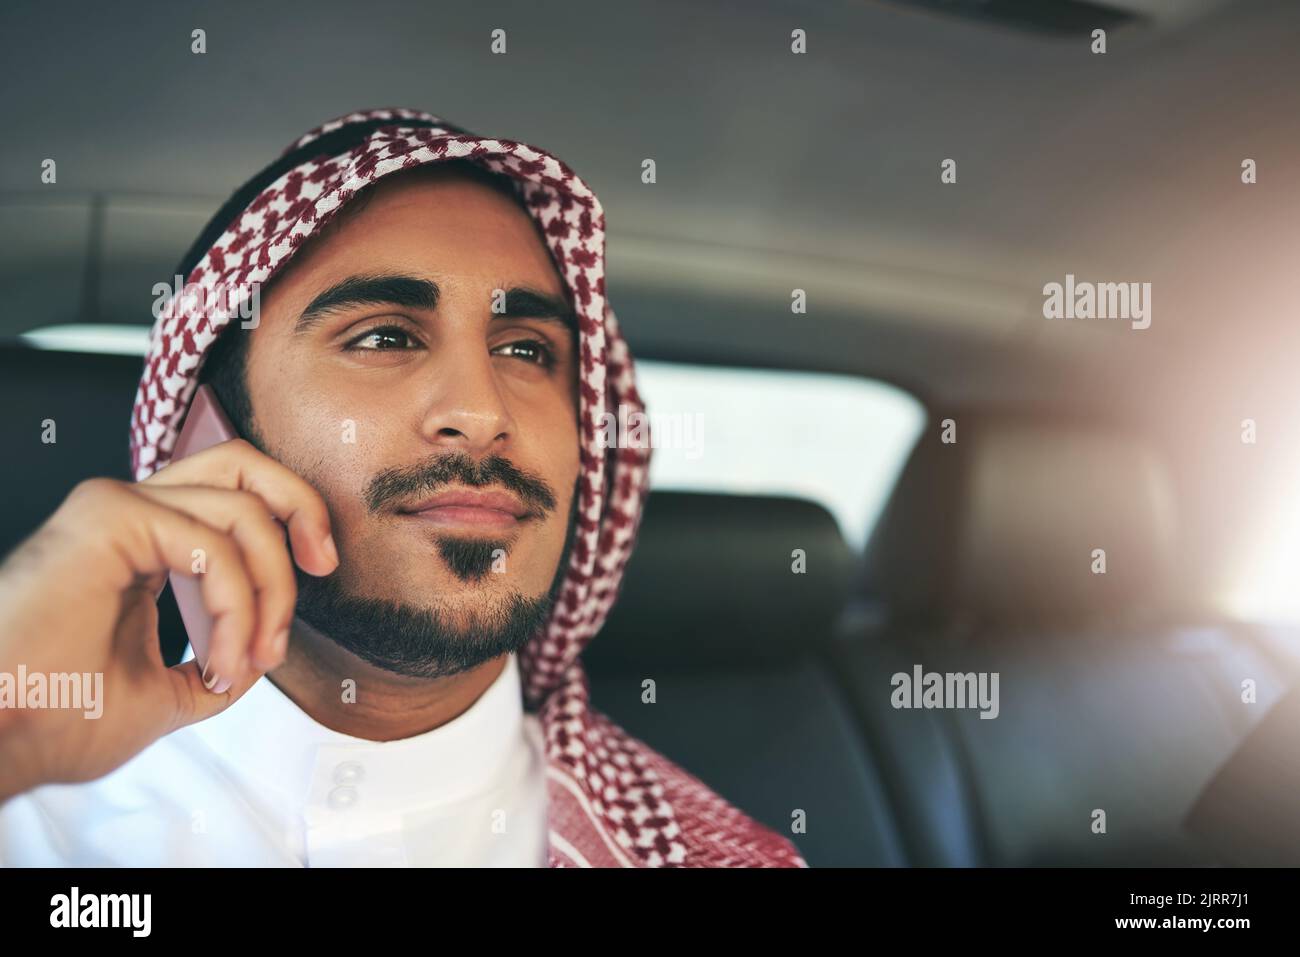 His expertise is always in demand. a young muslim businessman using his phone while traveling in a car. Stock Photo